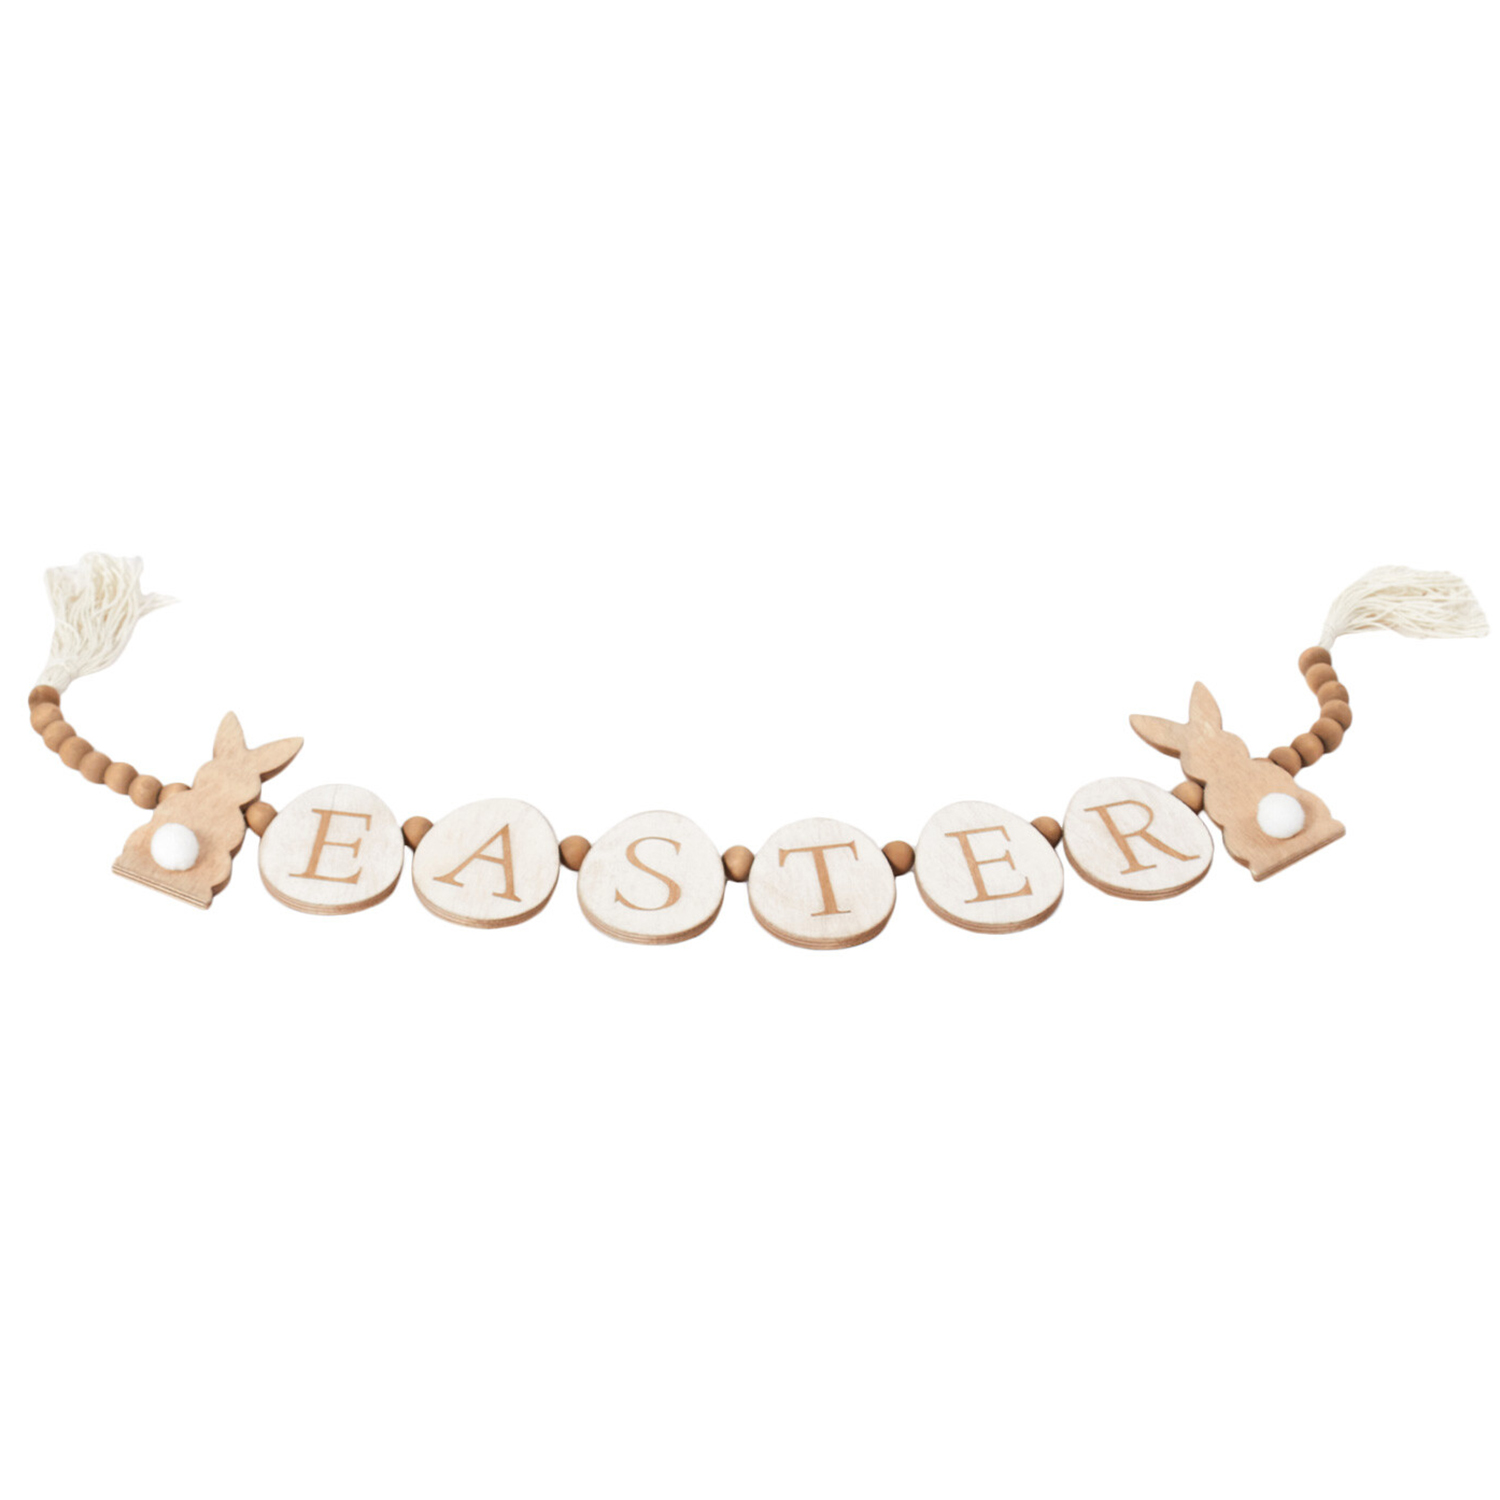 Wooden Bunny Garland - White Image 1